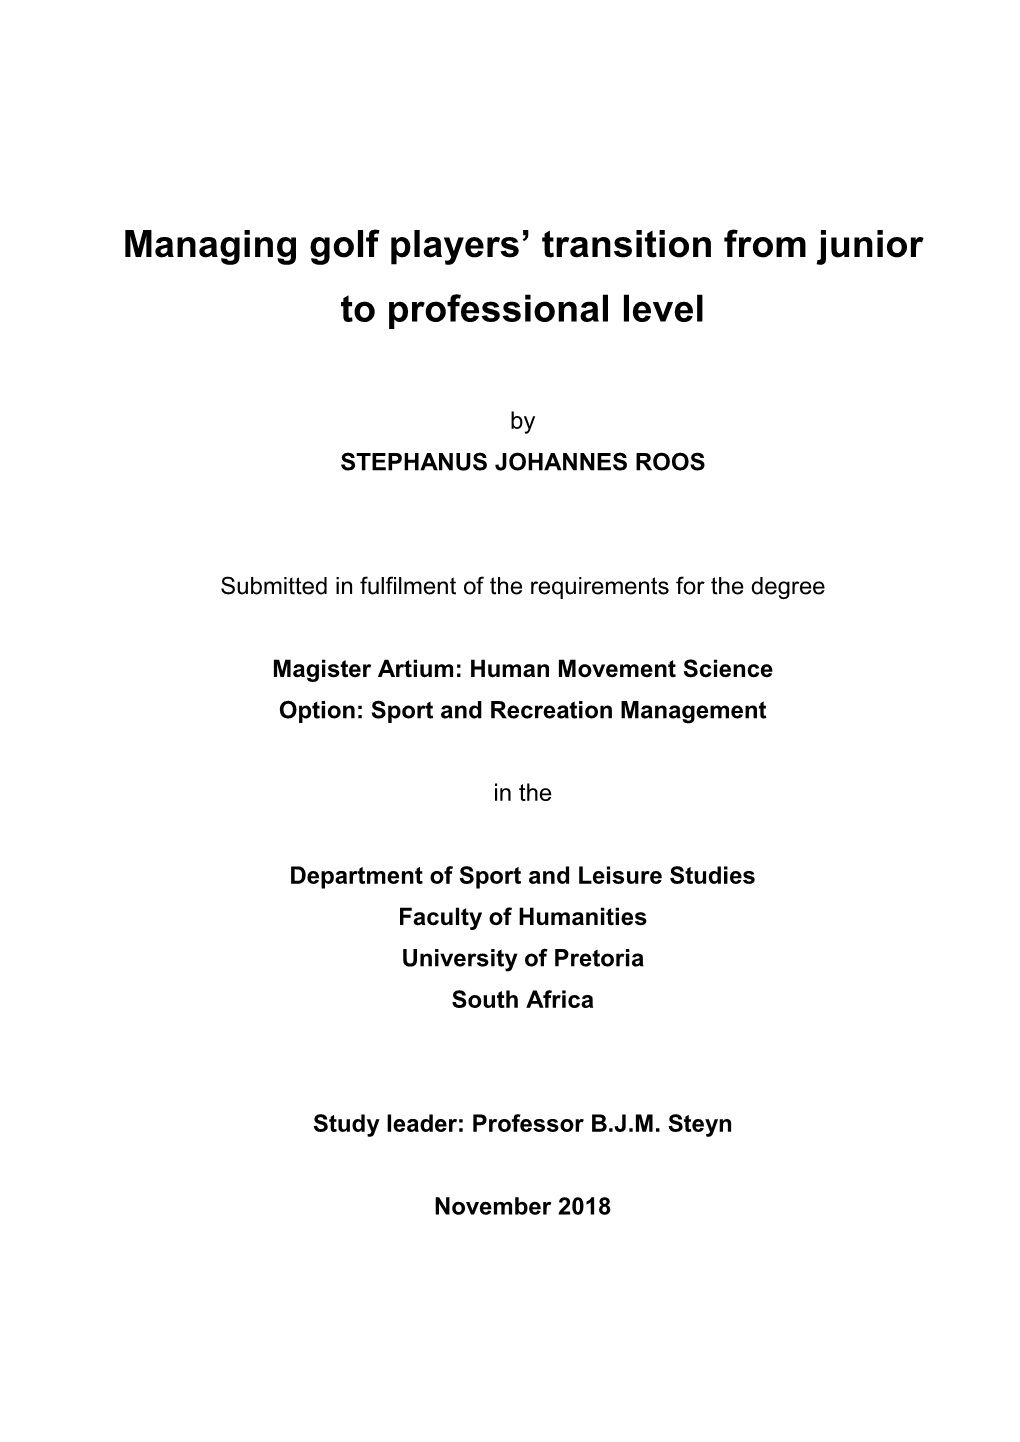 Managing Golf Players' Transition from Junior to Professional Level